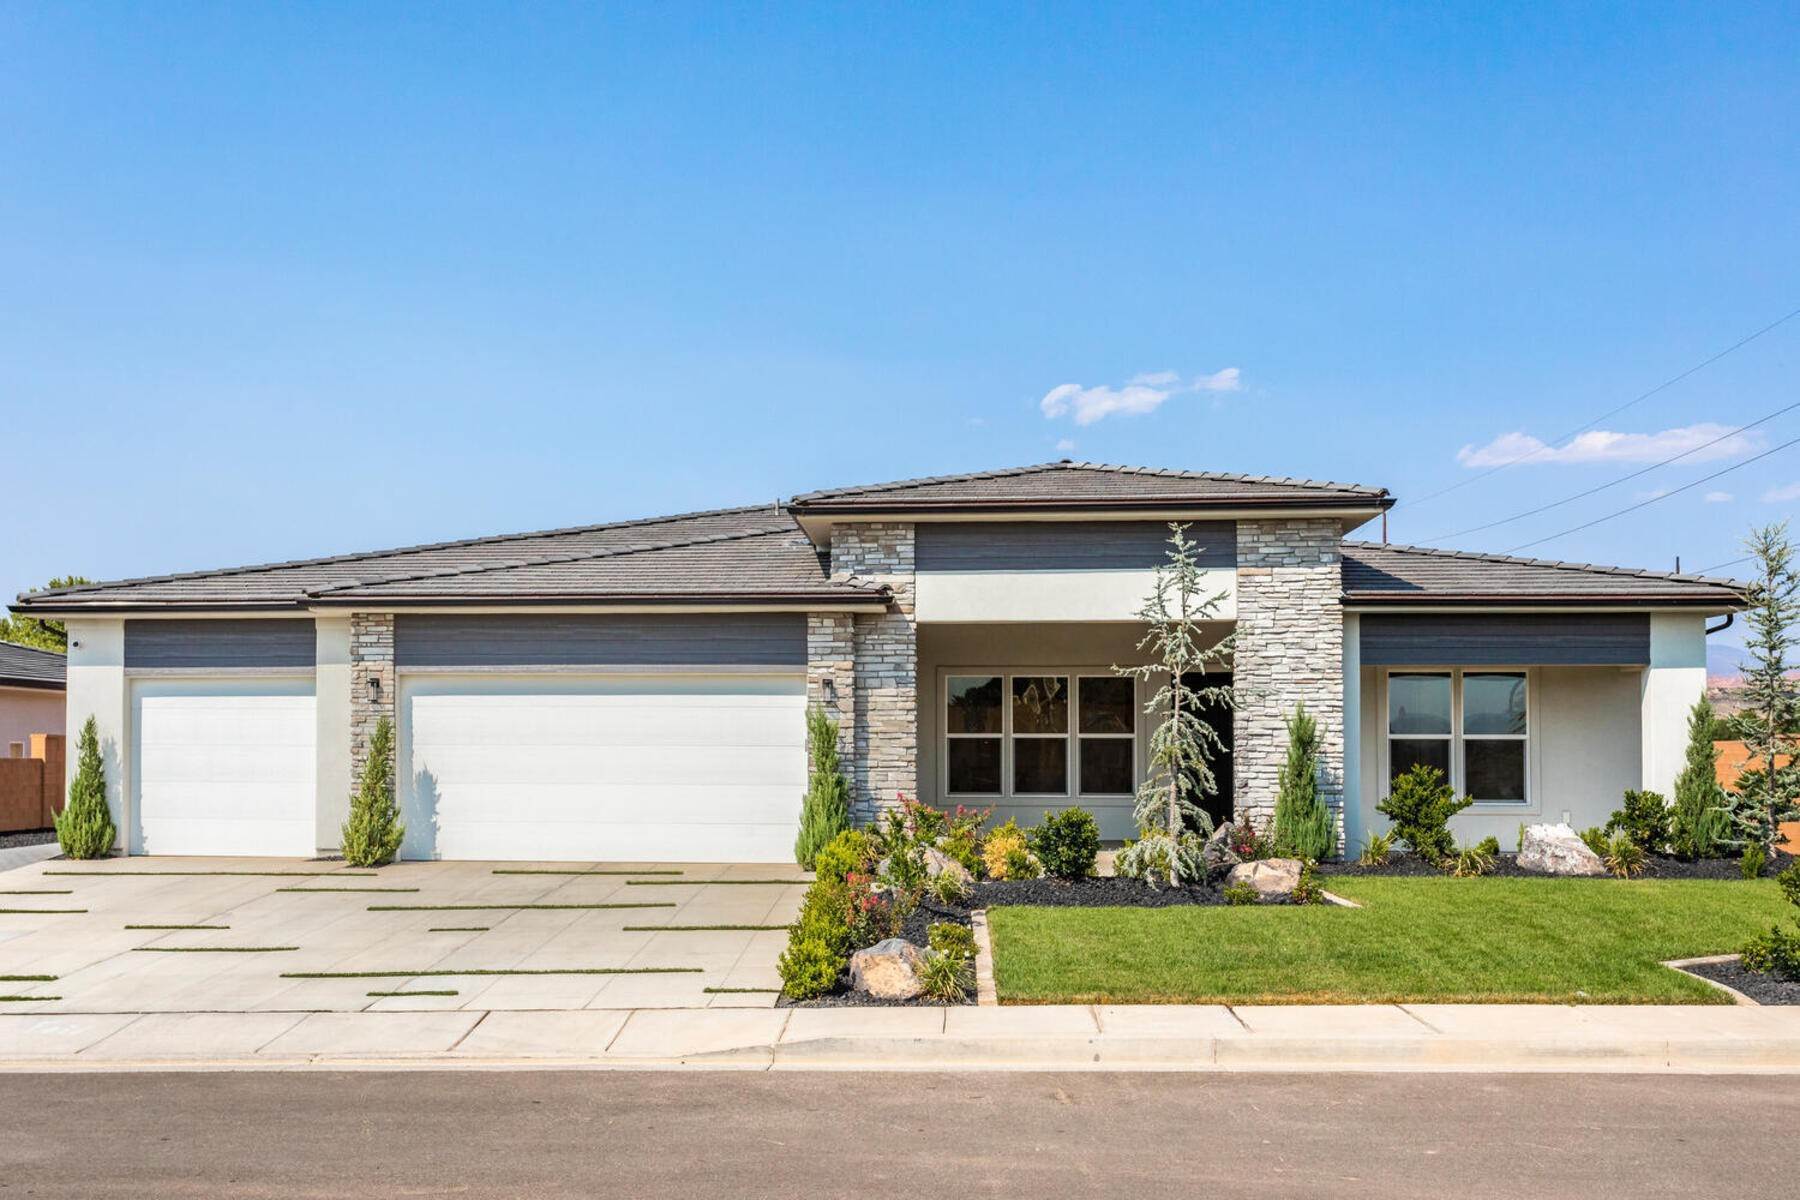 Single Family Homes for Sale at Welcome To Shooting Star, Up And Coming Subdivision In Washington Fields! 1629 E Centaurus Way, Lot #93 Washington, Utah 84780 United States